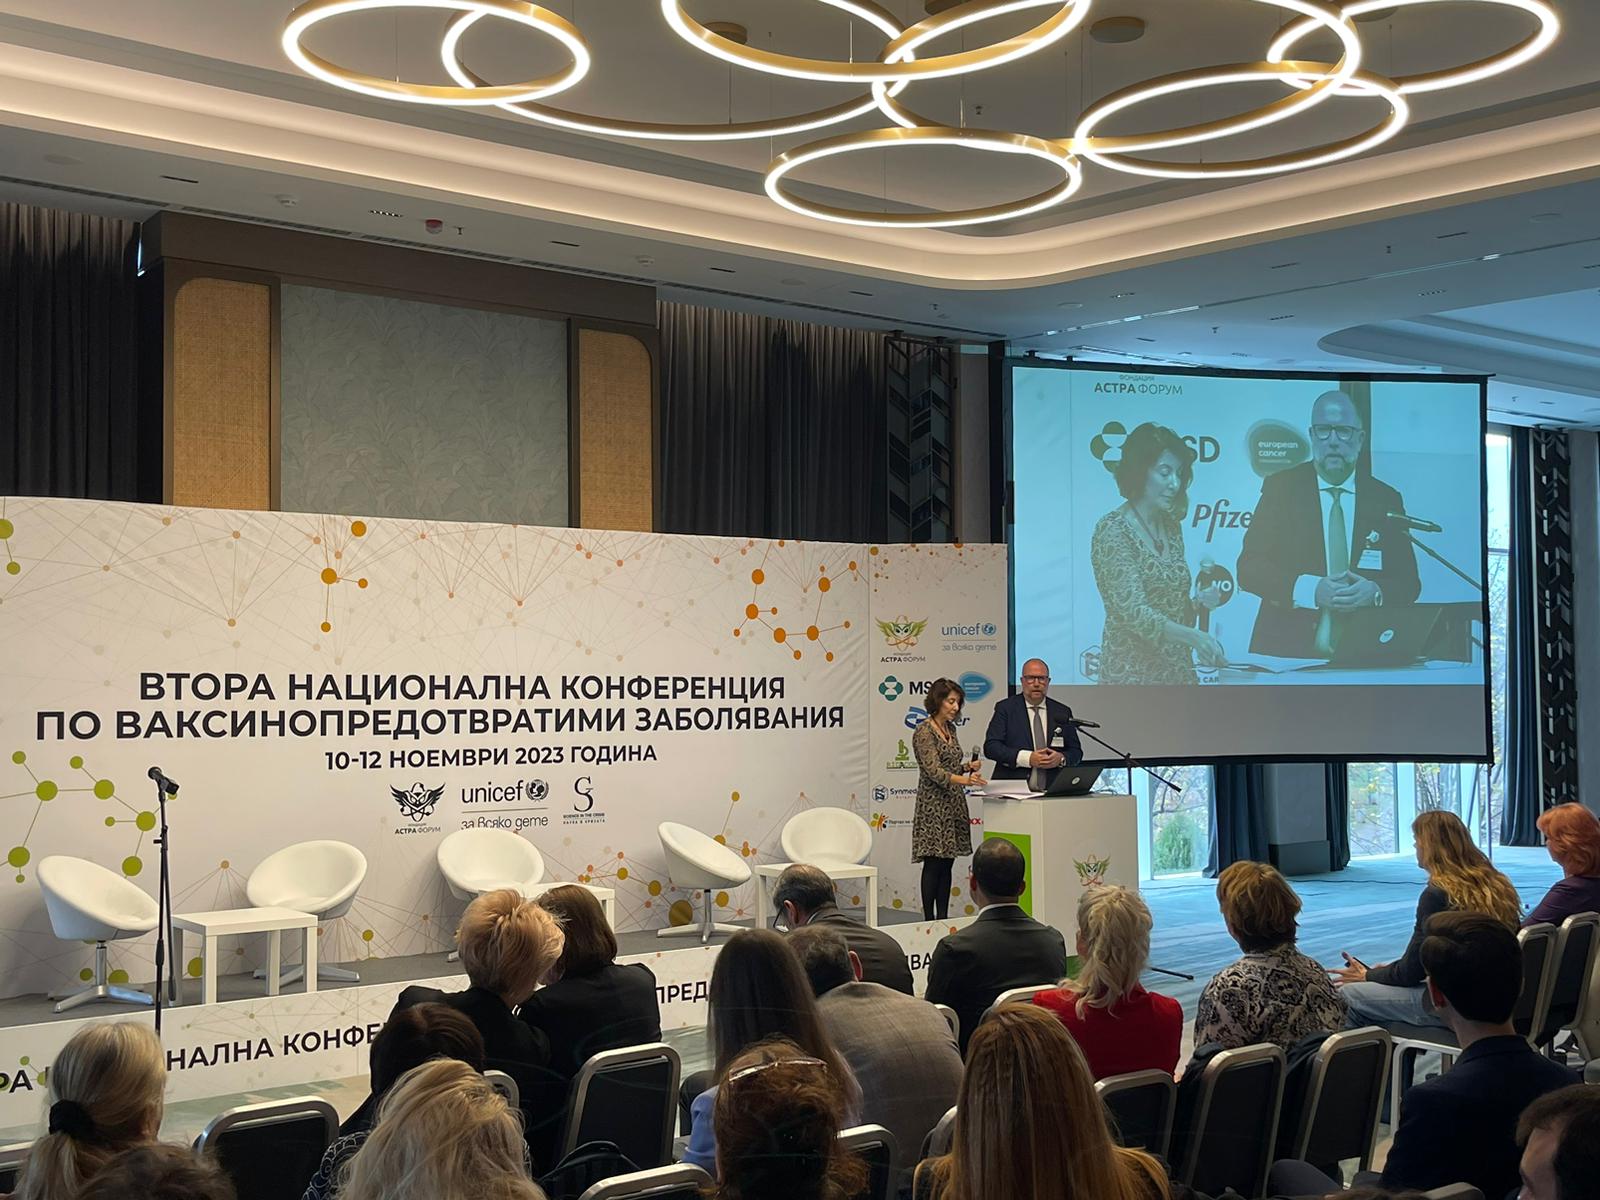 Second National Conference for Vaccine Preventable Cancers Bulgaria